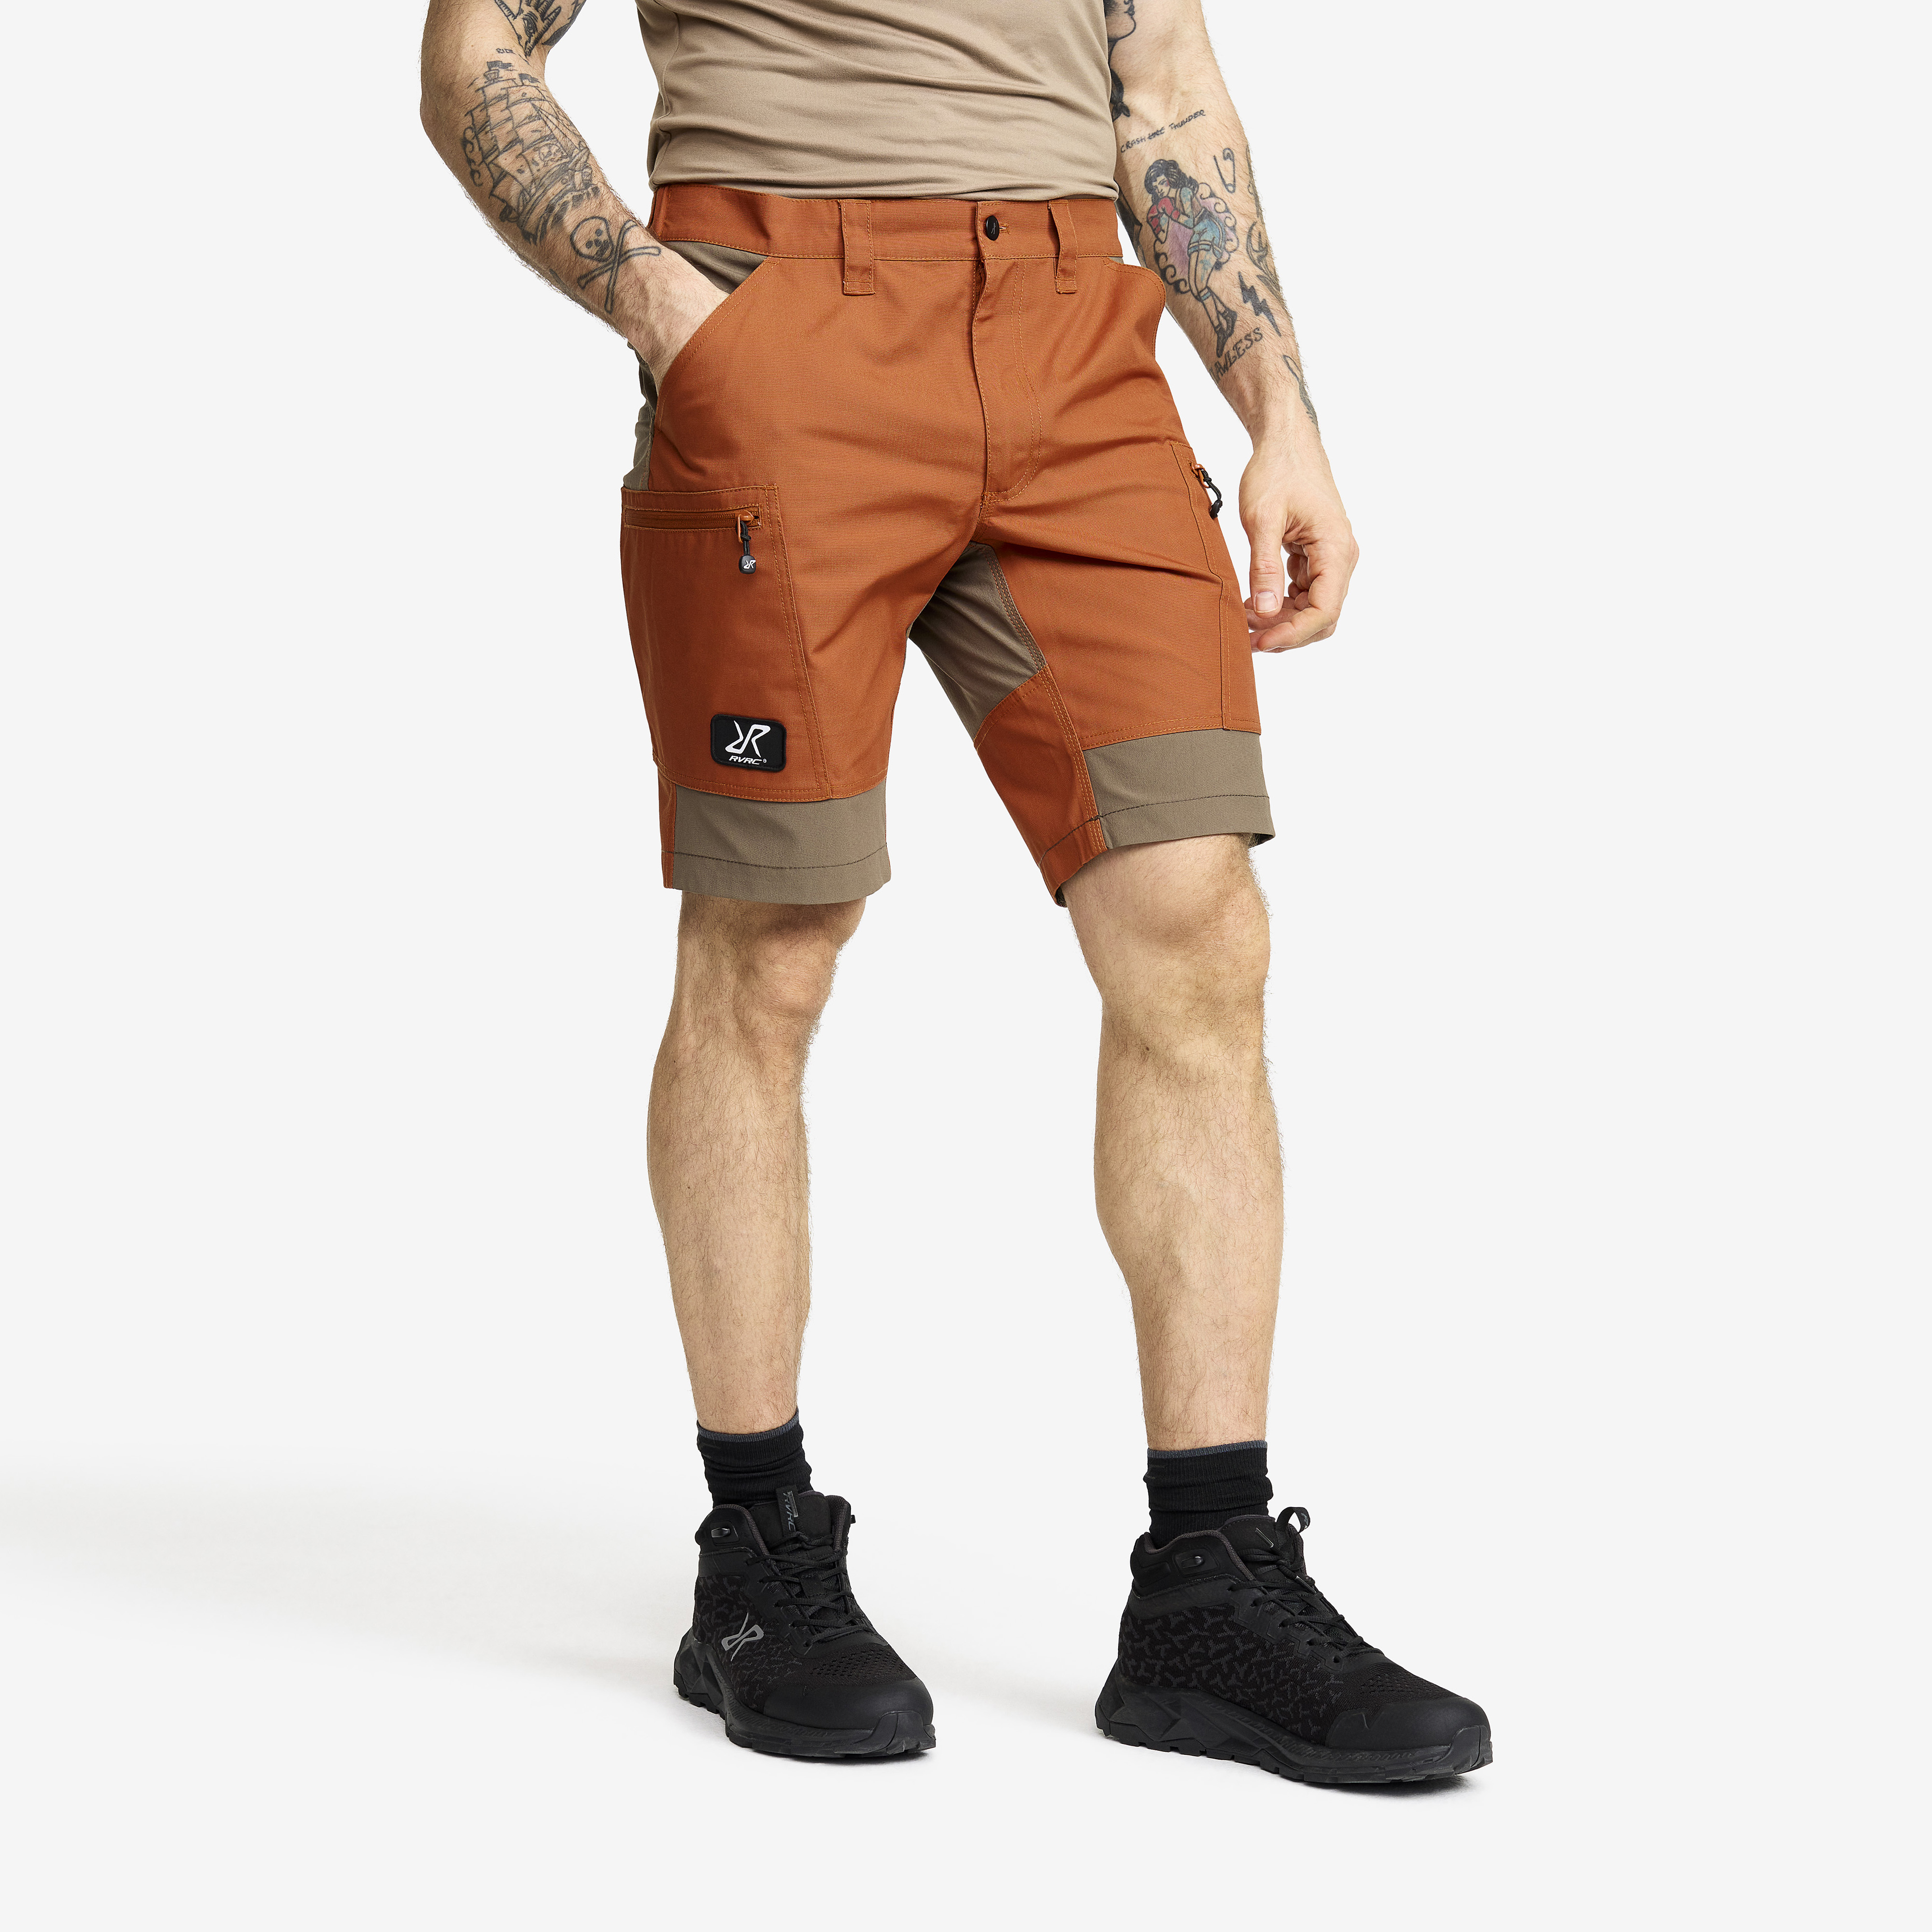 Nordwand Shorts Teracotta Brown/chocolate Chip Men